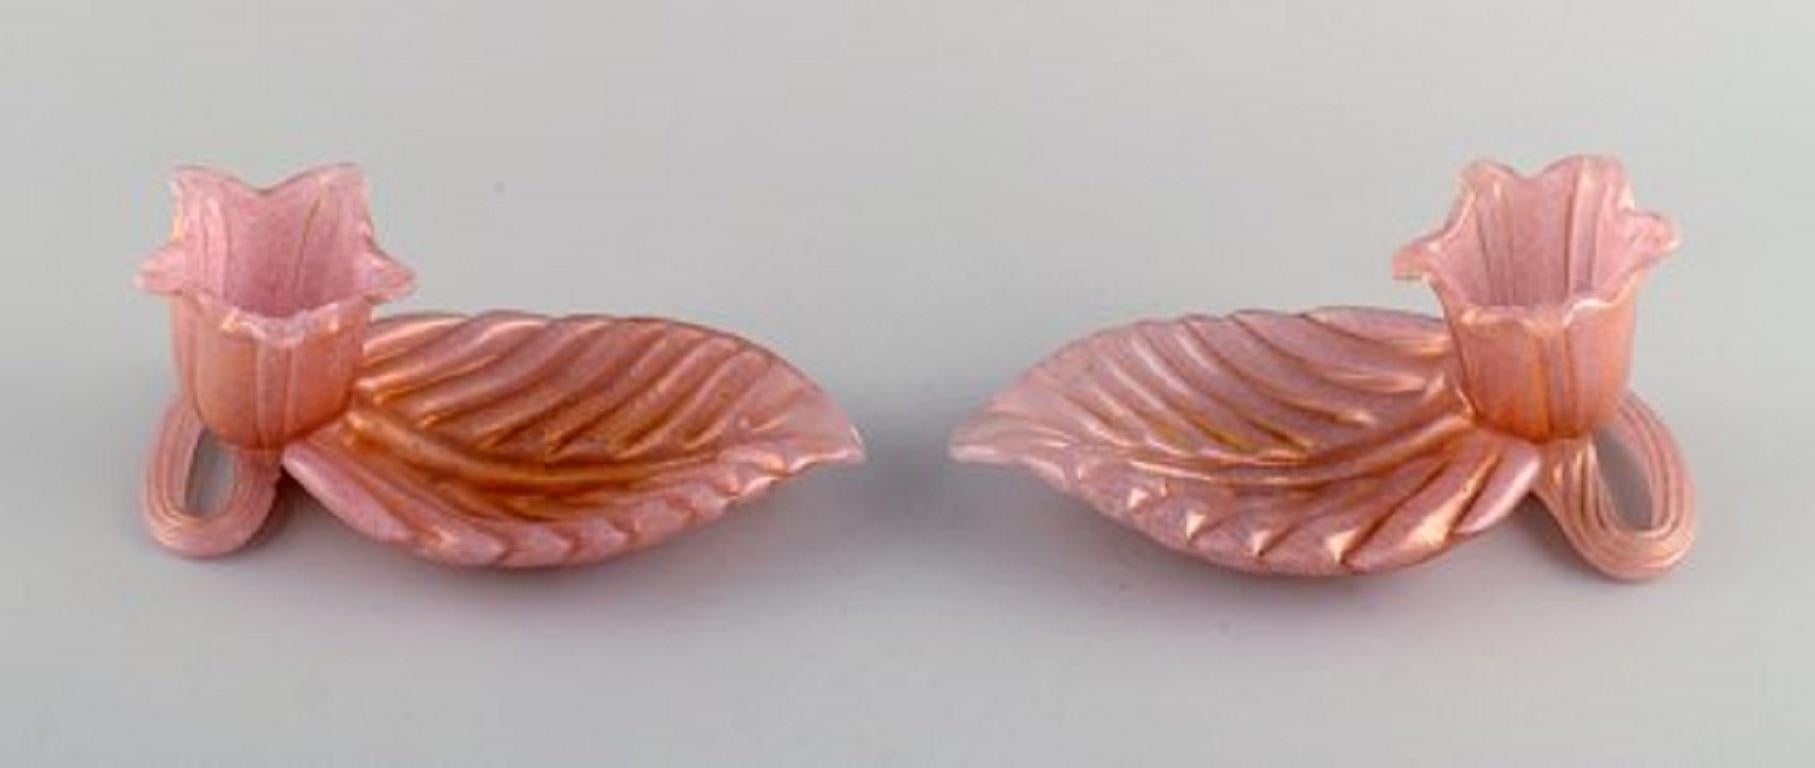 Barovier and Toso, Venice. A pair of organically shaped bowls in pink mouth-blown art glass. 
Italian design, 1960s.
Measures: 18 x 9 cm
In excellent condition.
Sticker.